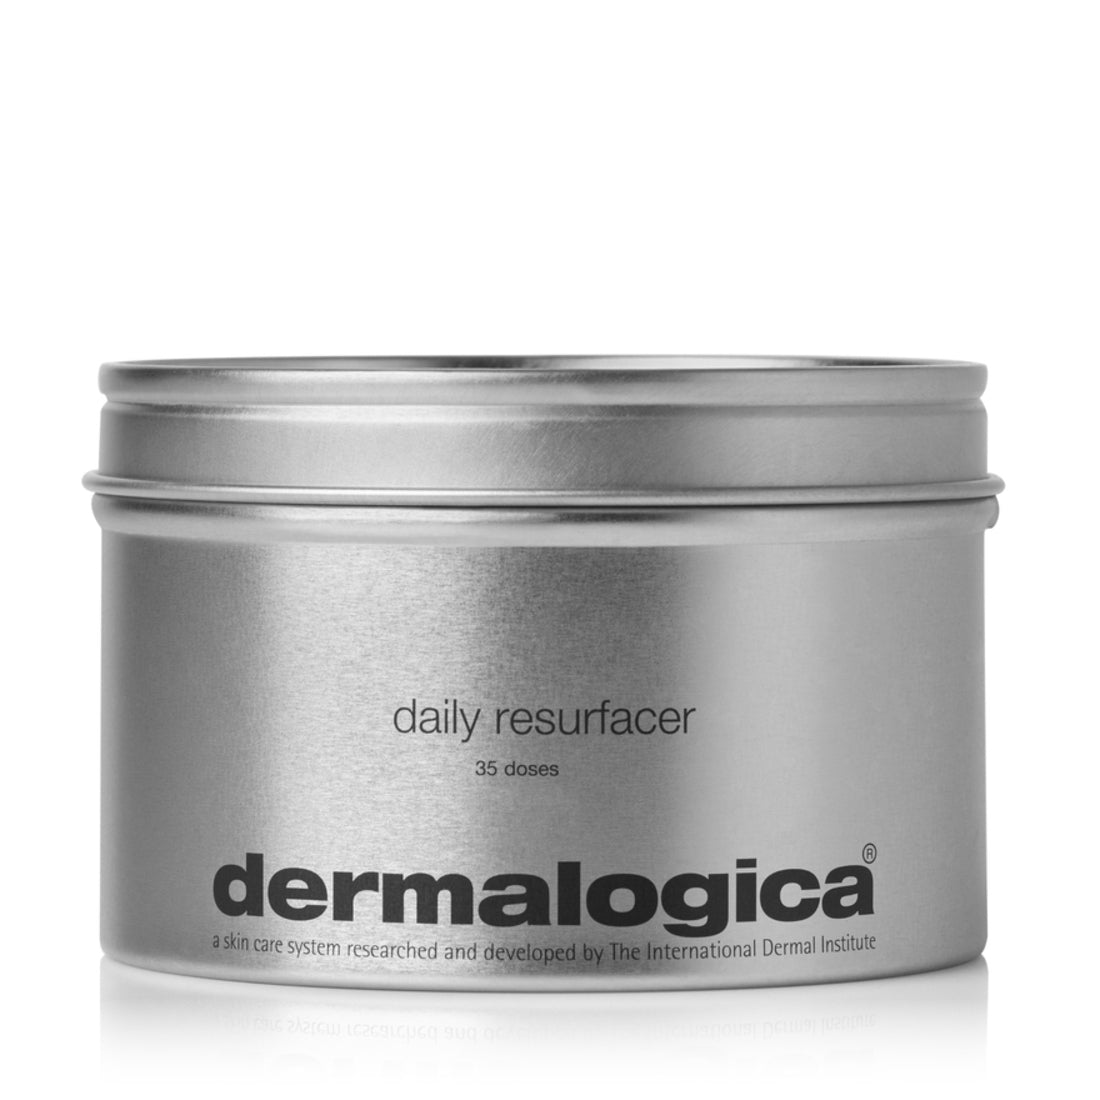 Dermalogica Daily Resurfacer - Heaven Therapy Skincare (7156821196960)